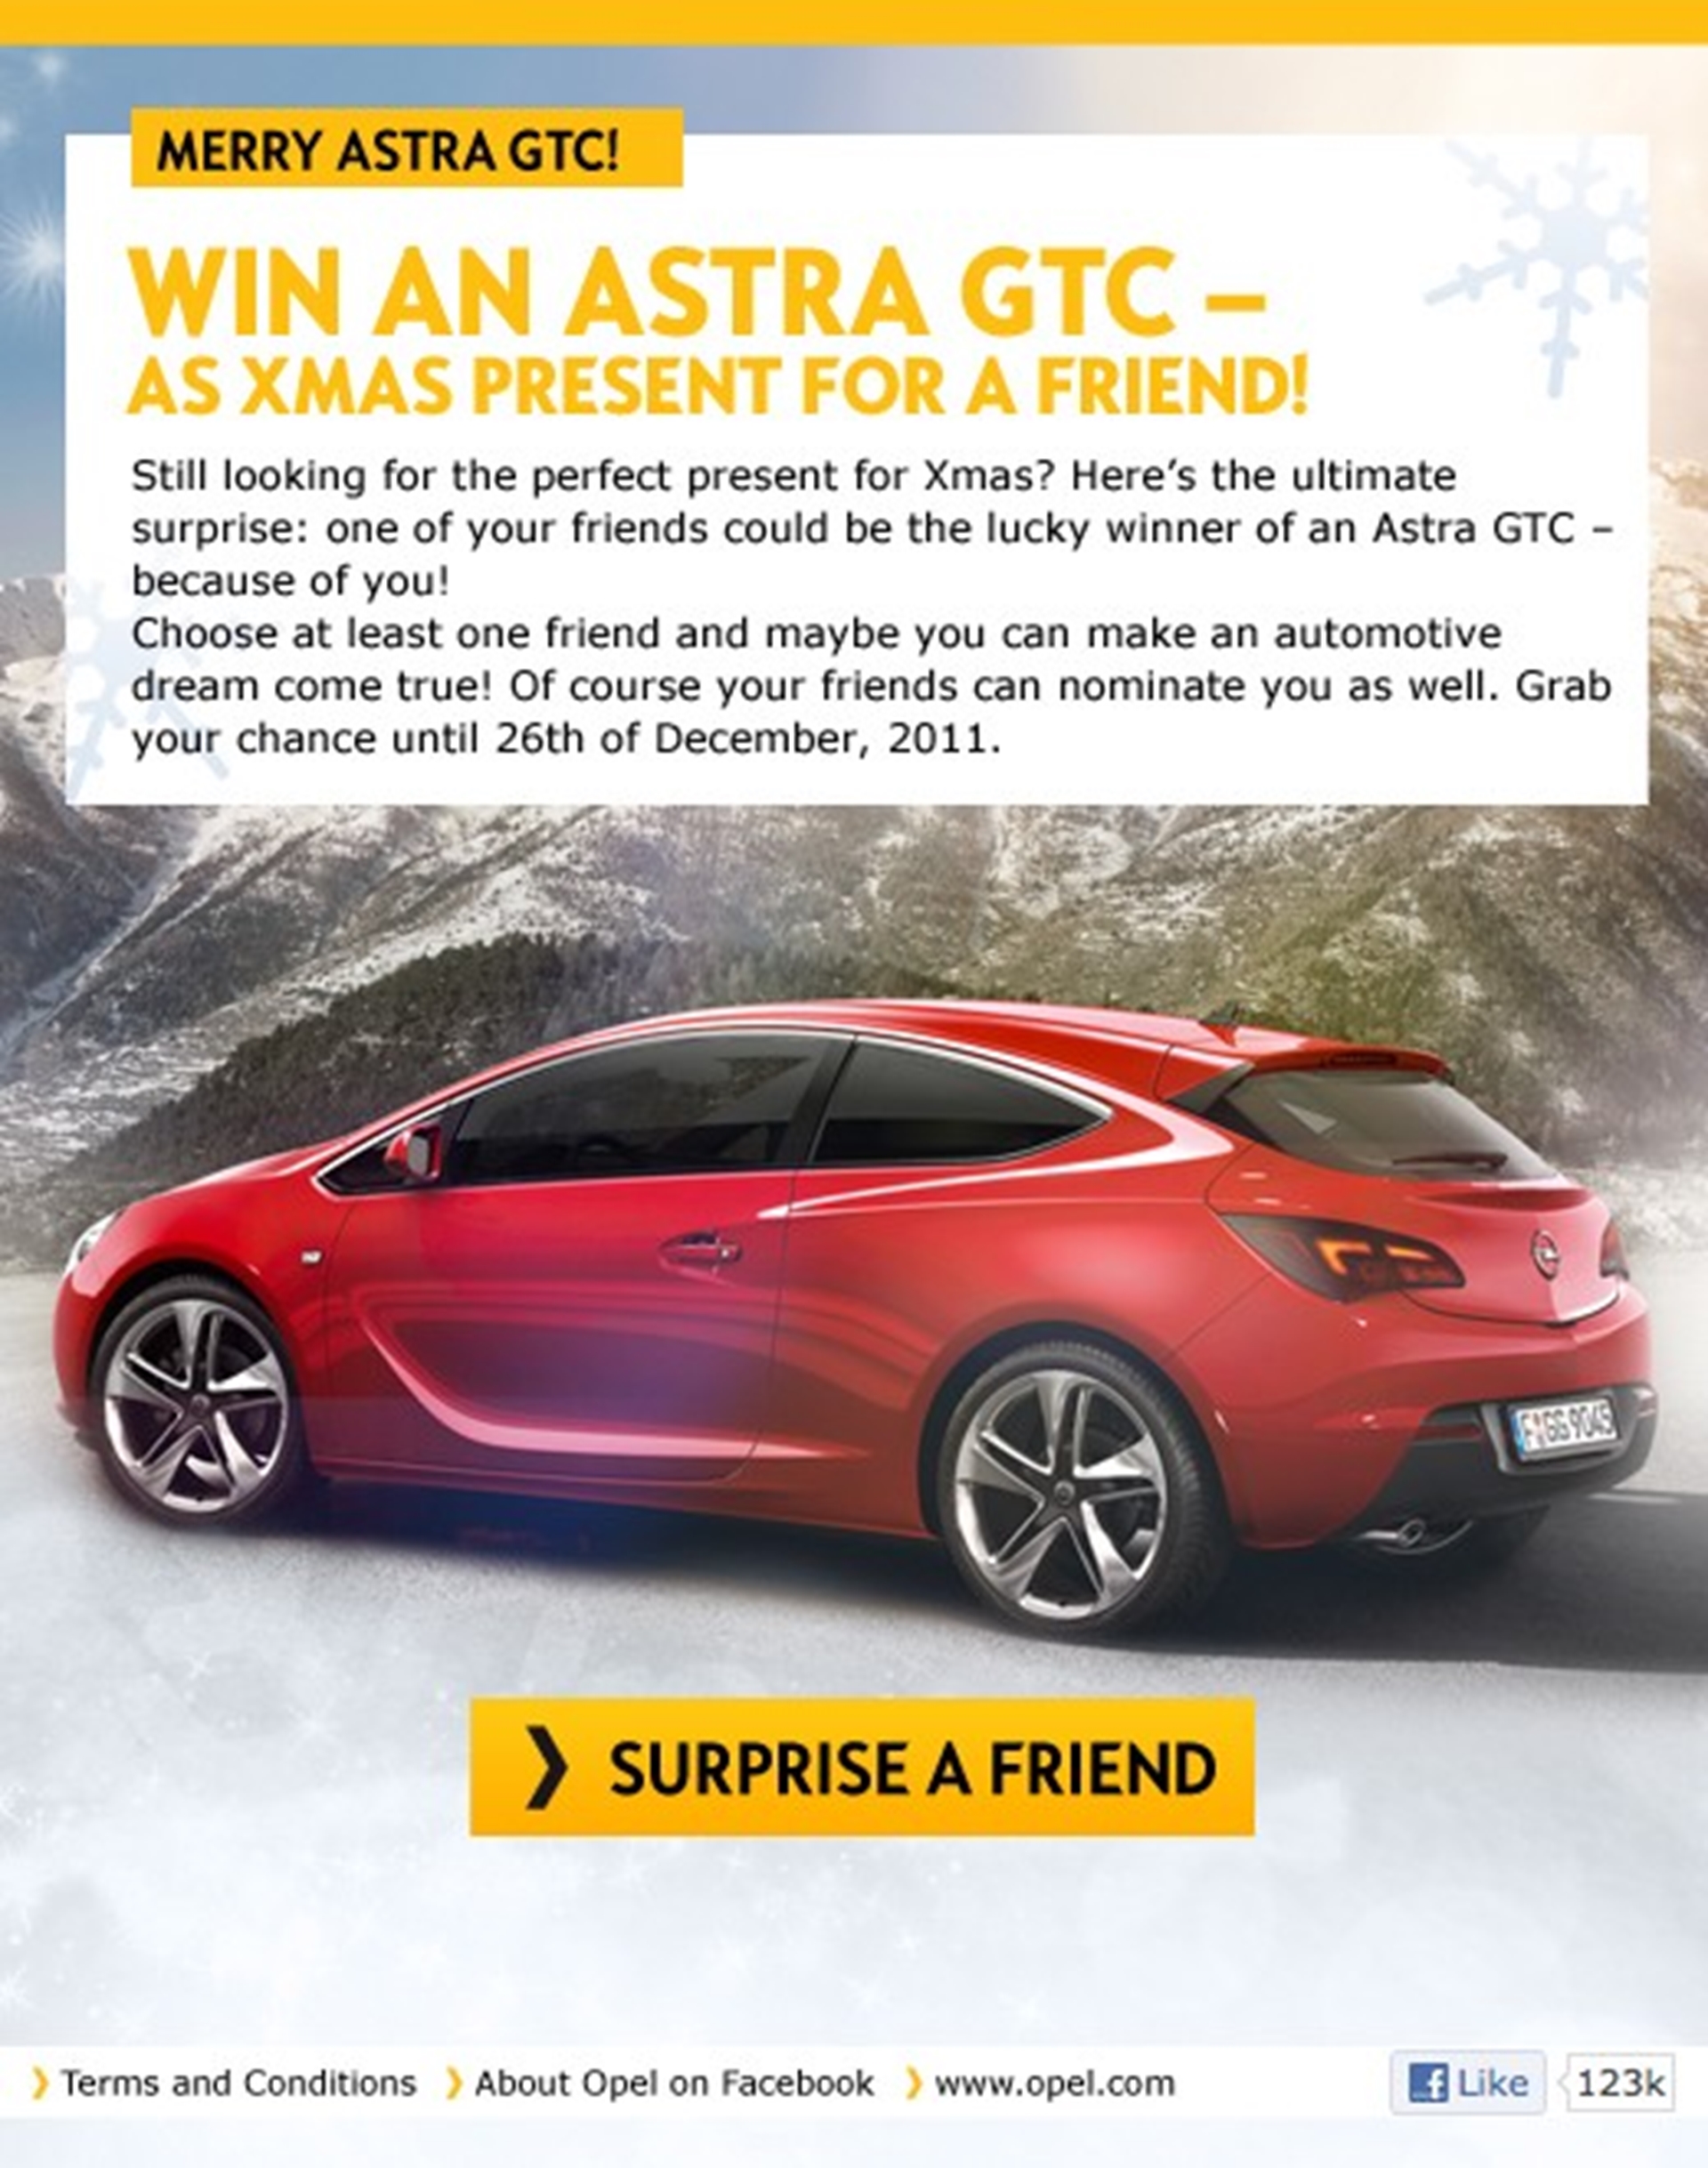 Facebook users get a surprise Astra GTC as a Christmas gift